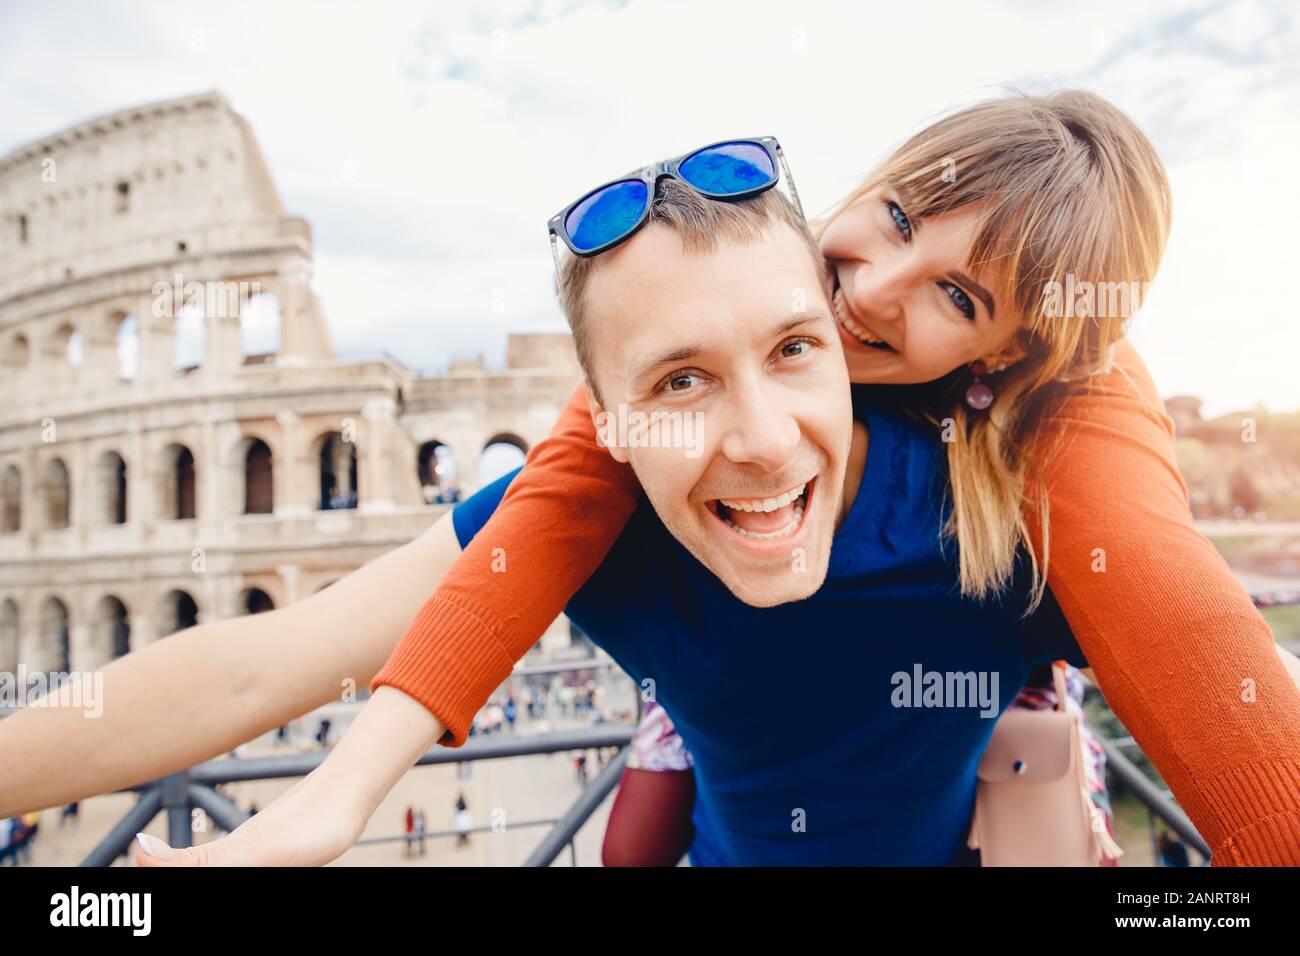 Travel couple man and girl taking selfie photo Colosseum landmark in Rome city. Concept europe Italy summer, people smiling Stock Photo